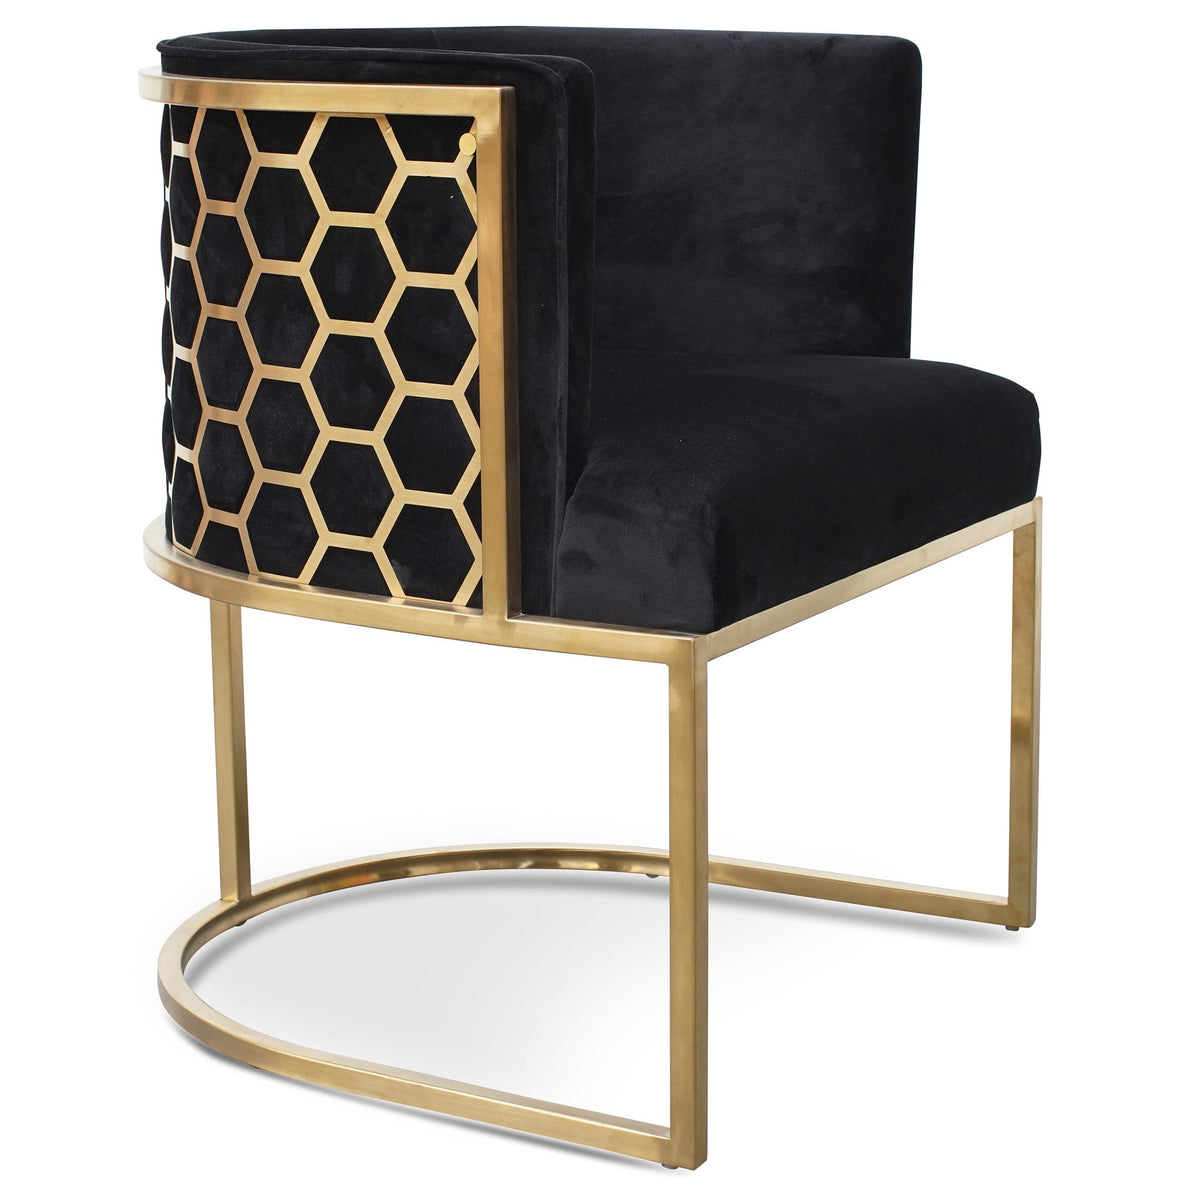 Kate-lounge-chair-in-black-velvet-seat-brushed-gold-armchair